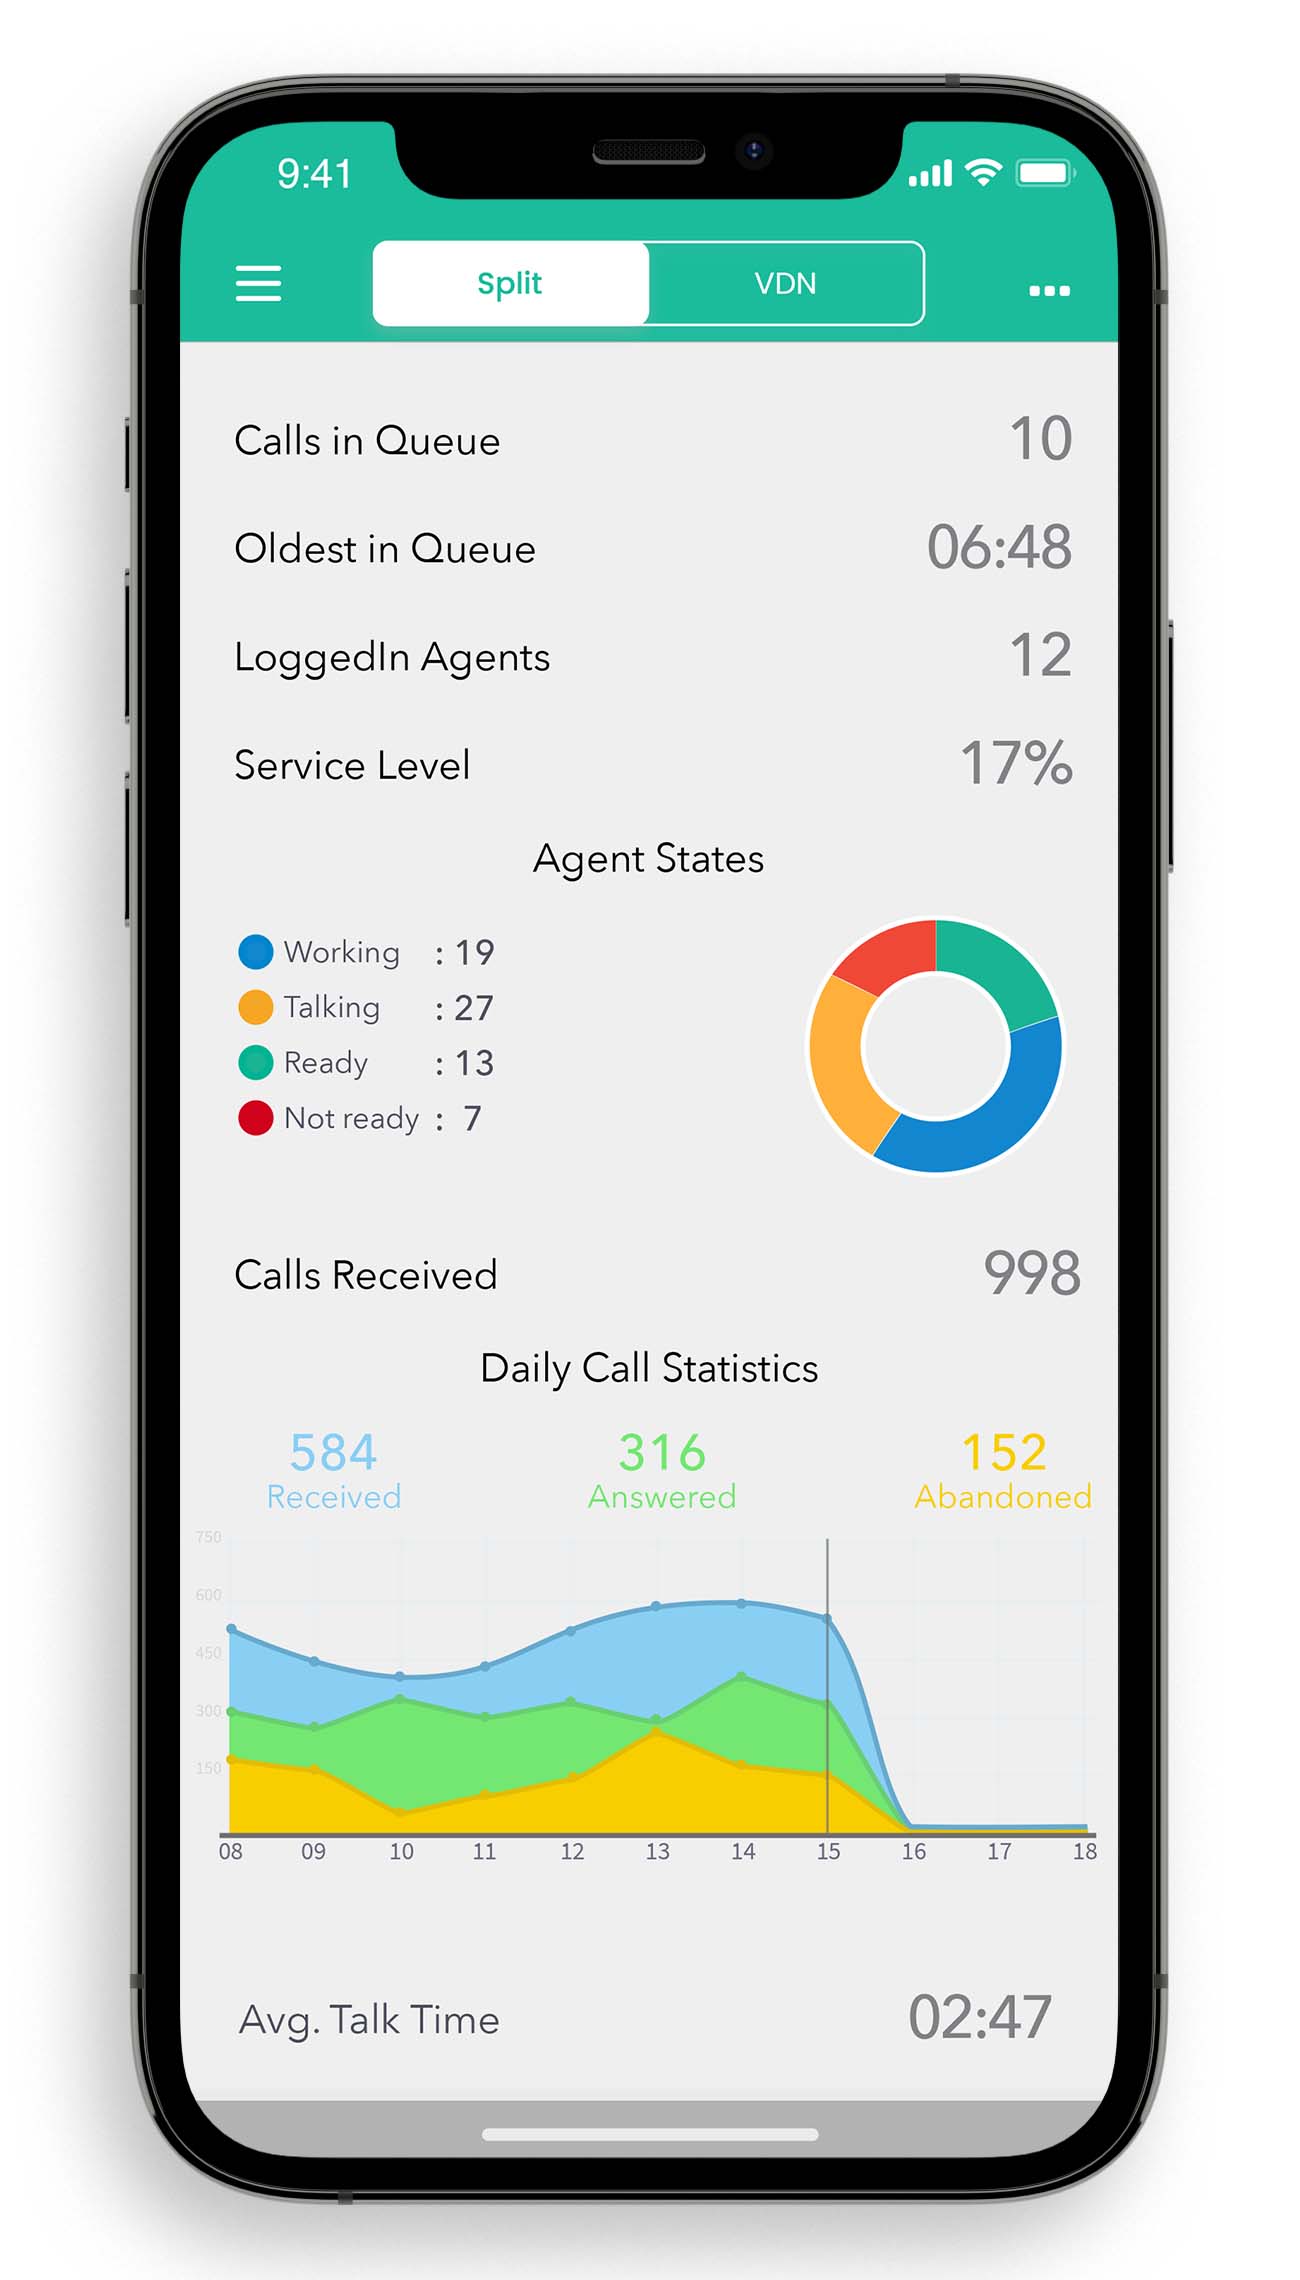 Cisco UCCE Wallboard Mobile App